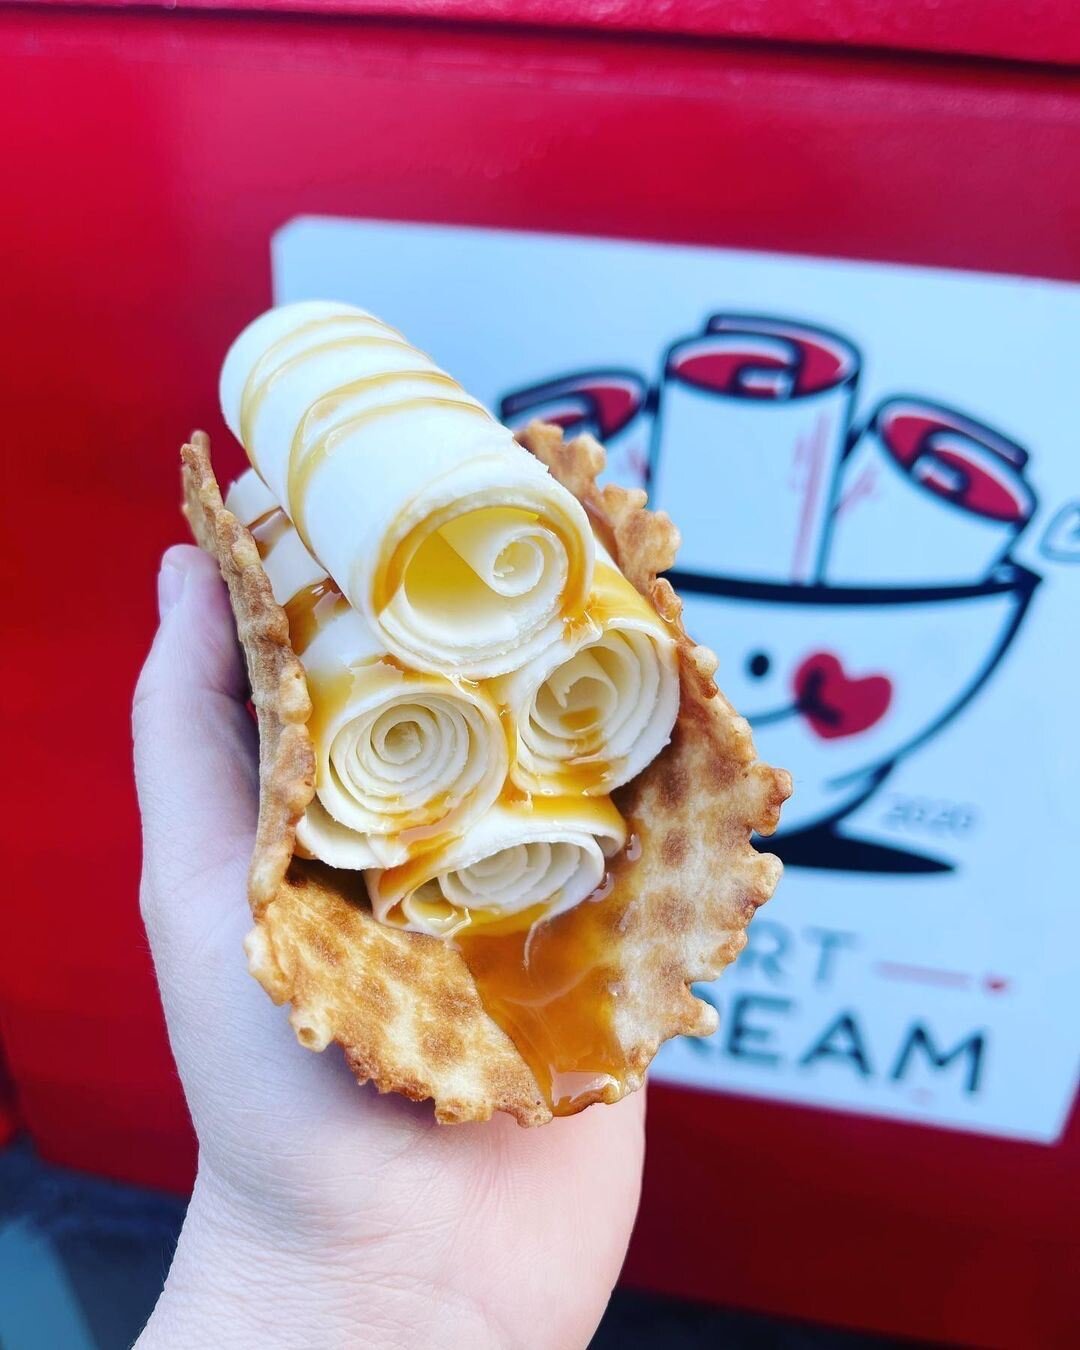 🍦💖🍦Sending you nothing but sweet wishes this Mother's Day!

It's also a great time to mention that this super fun rolled ice cream from @ihearticecreamcart will be out The Brightside's Venue Open House &amp; Mini Food Truck Rally this Tuesday, May